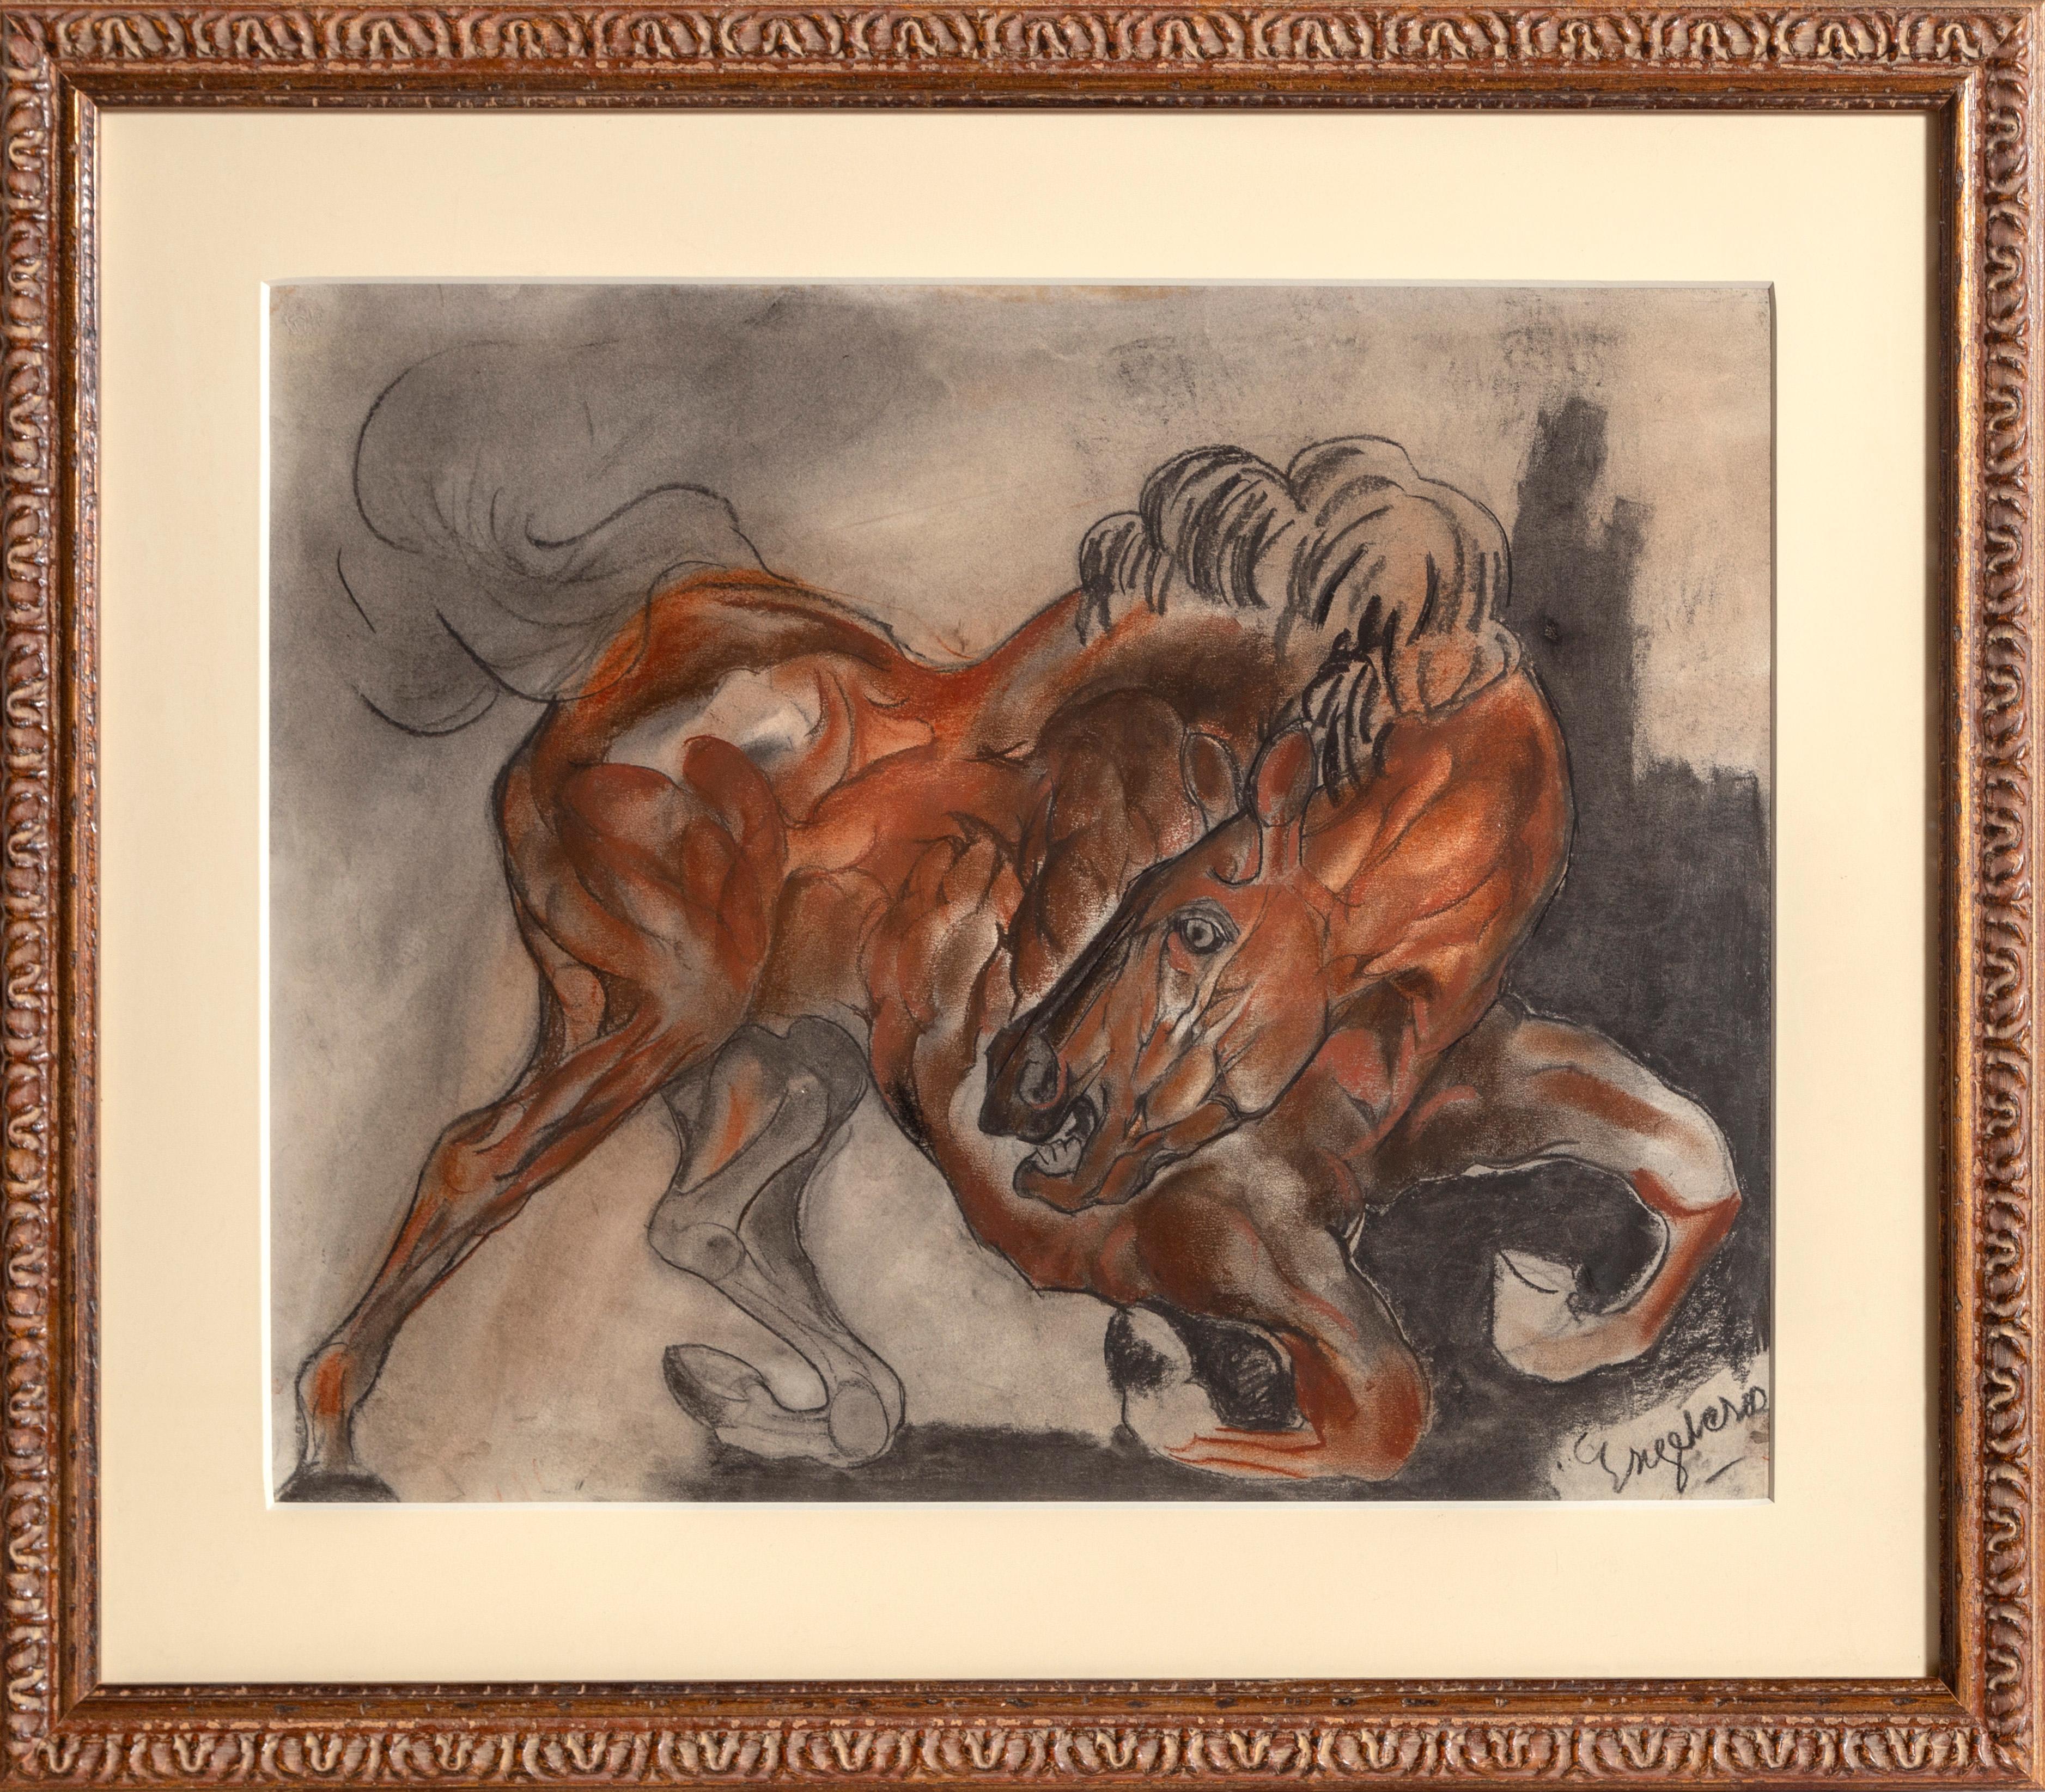 Unknown Figurative Art - Wild Horse, Framed Ink and Pastel Drawing